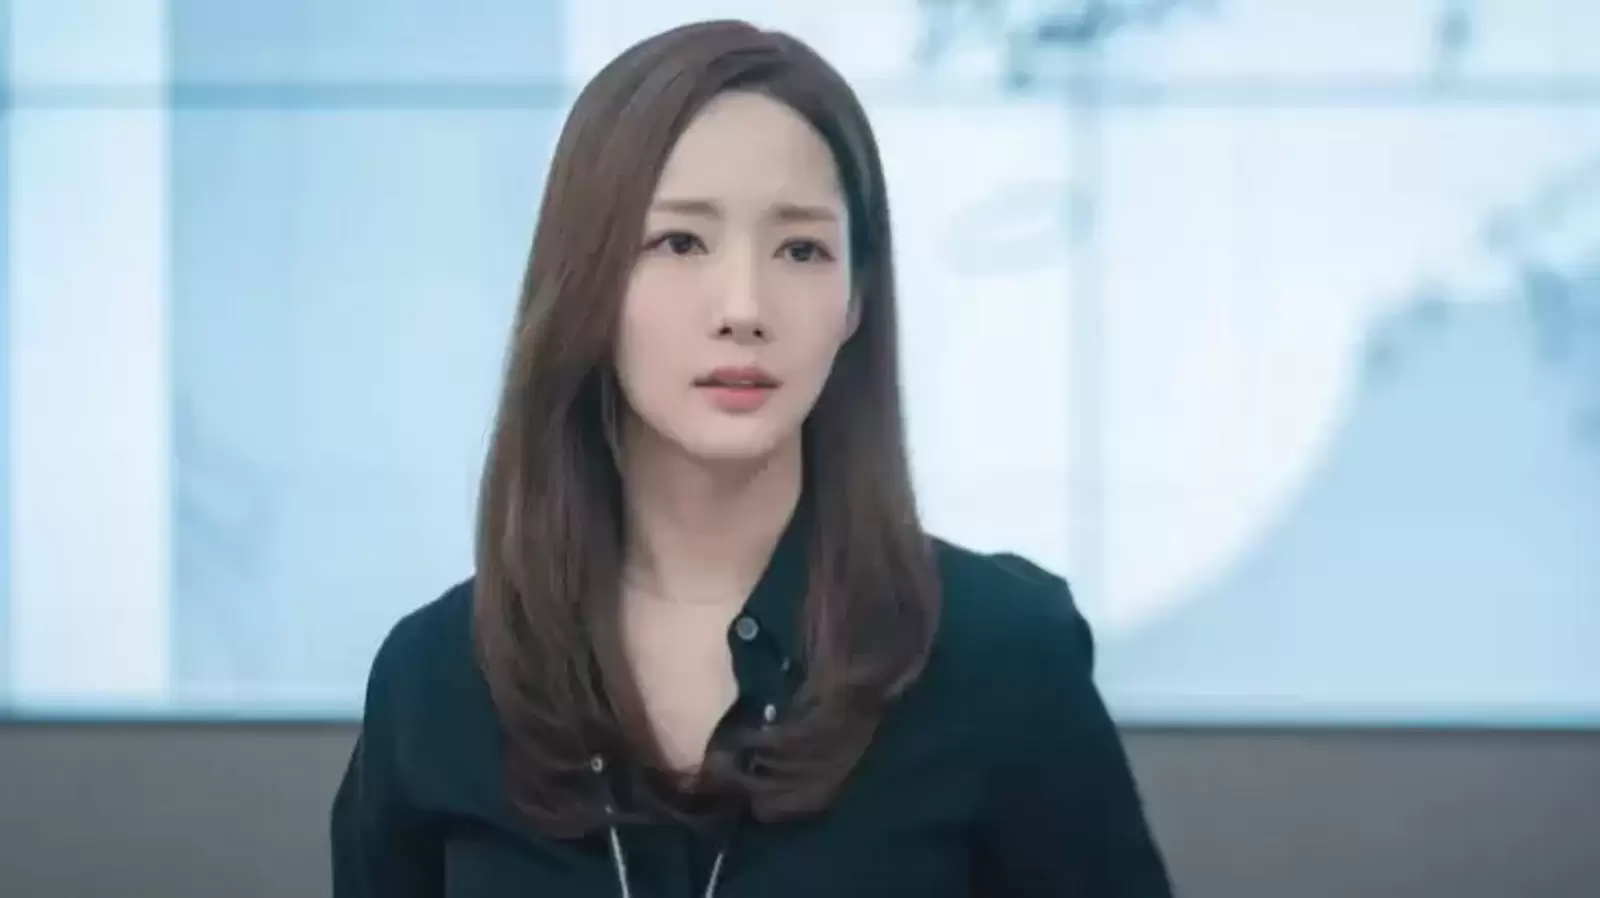 Park Min Young has broken up with her wealthy boyfriend, agency clarifies: ‘Didn’t receive monetary benefits’